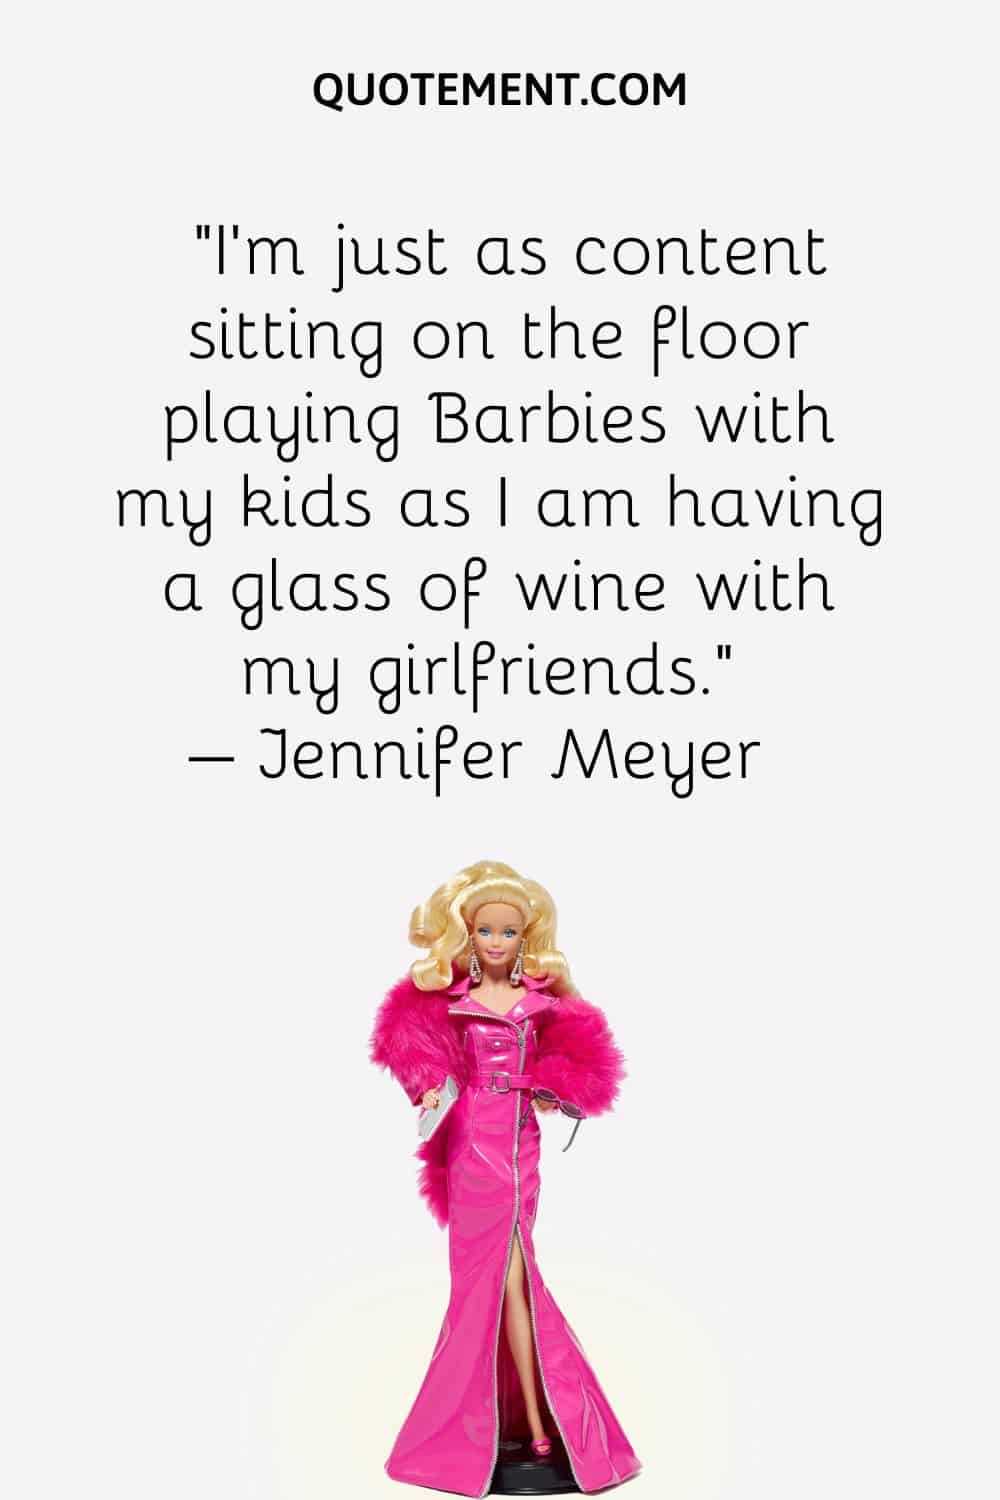 I'm just as content sitting on the floor playing Barbies with my kids as I am having a glass of wine with my girlfriends